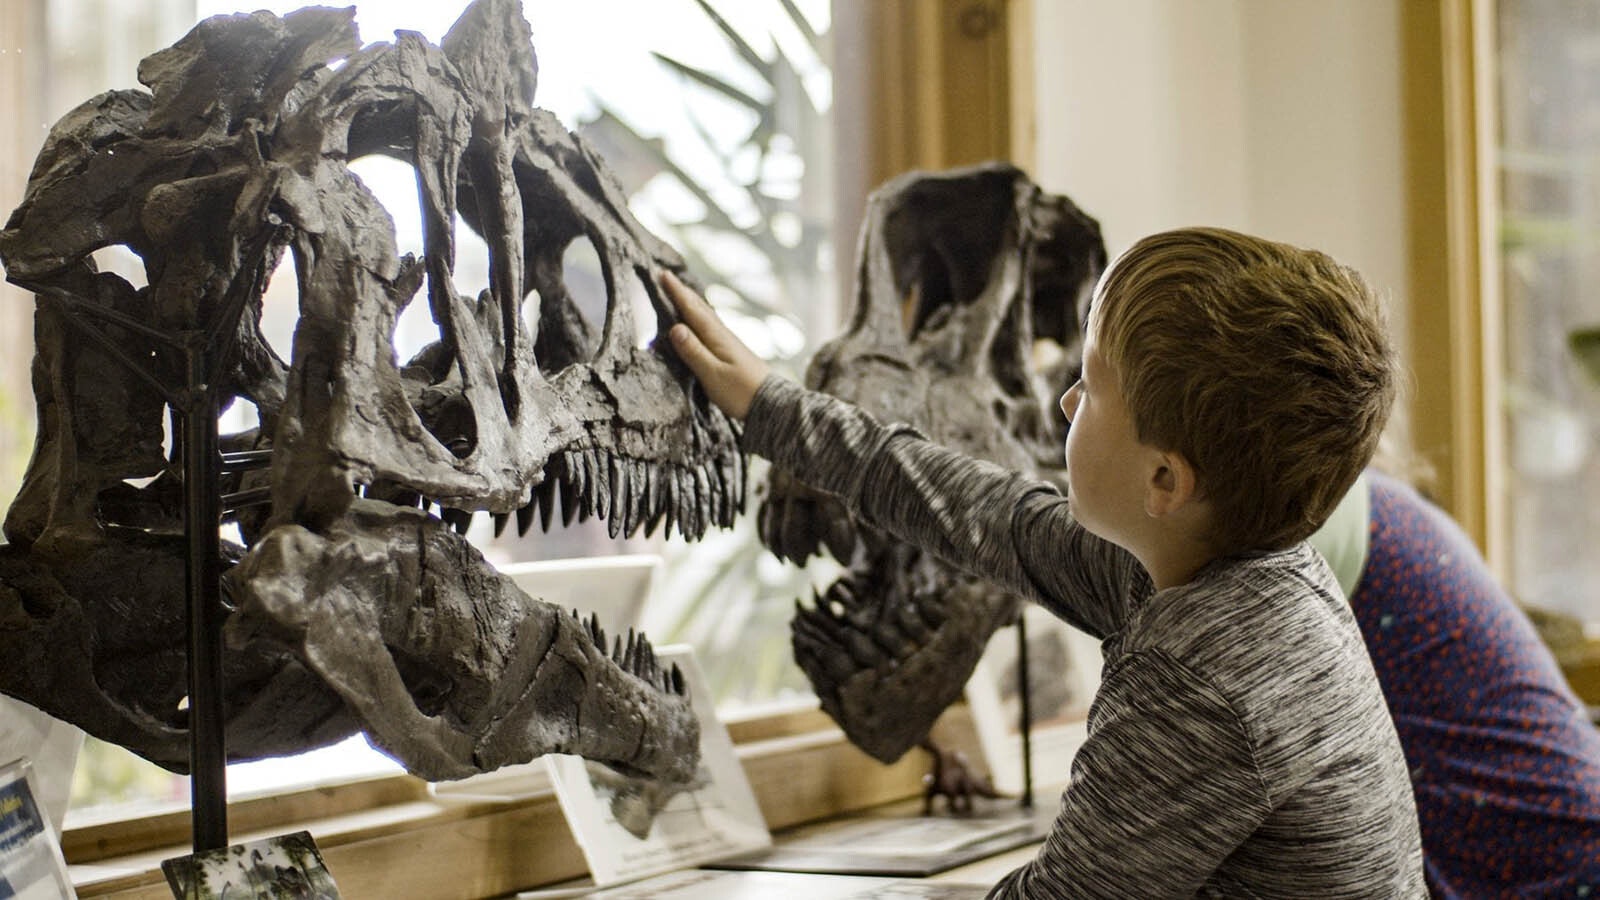 An effort is on to create a new world-class dinosaur museum in Greybull that could bring some of Wyoming's important prehistoric fossils home.